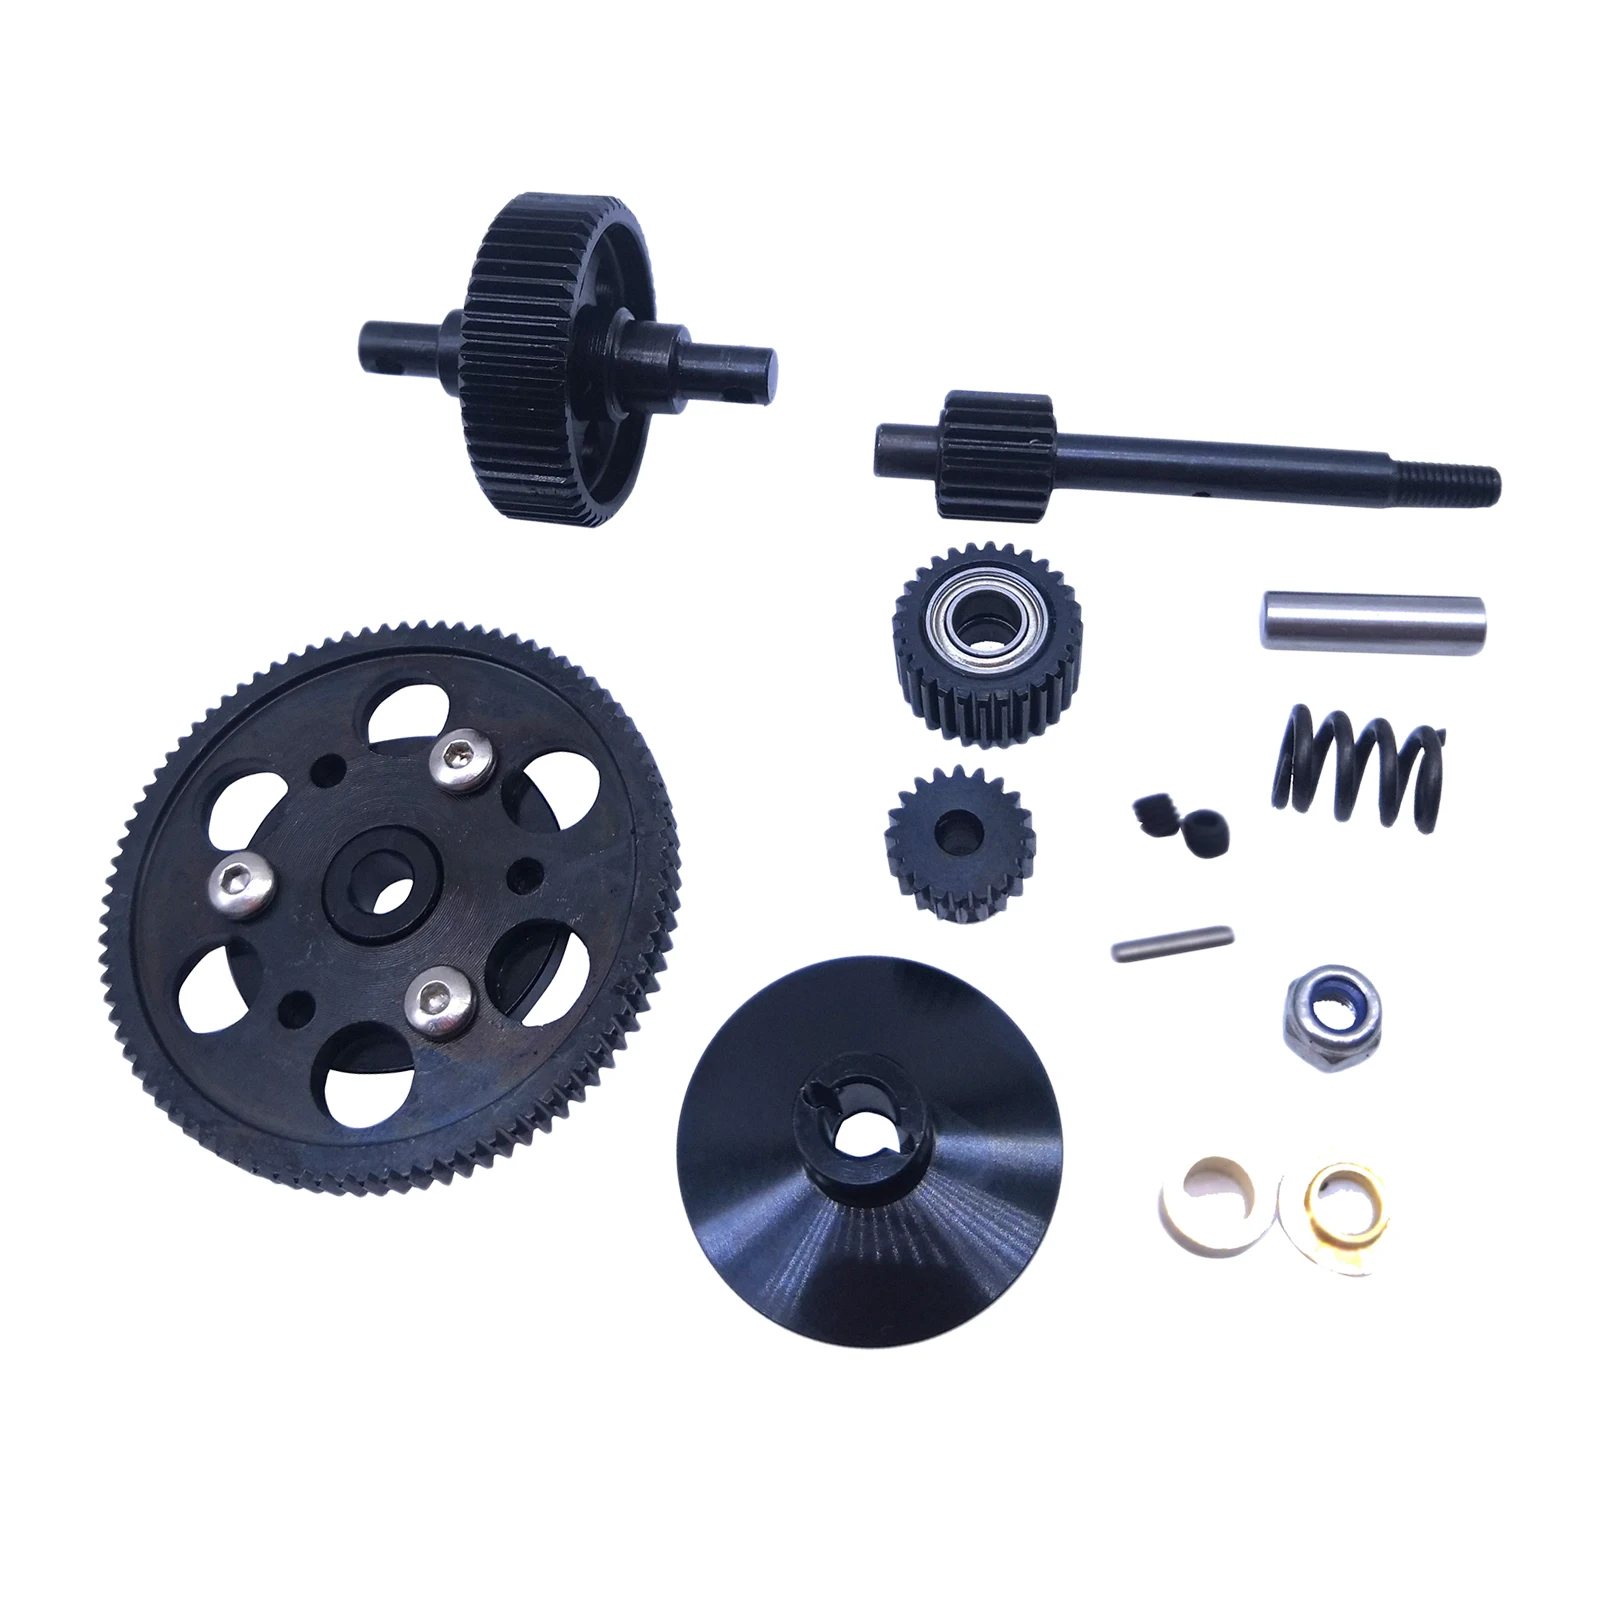 Complete Set Hardened Steel Transmission Gears With Motor Gear Big Gear 87T for Axial SCX10 1/10 RC Model Rock Crawler Car